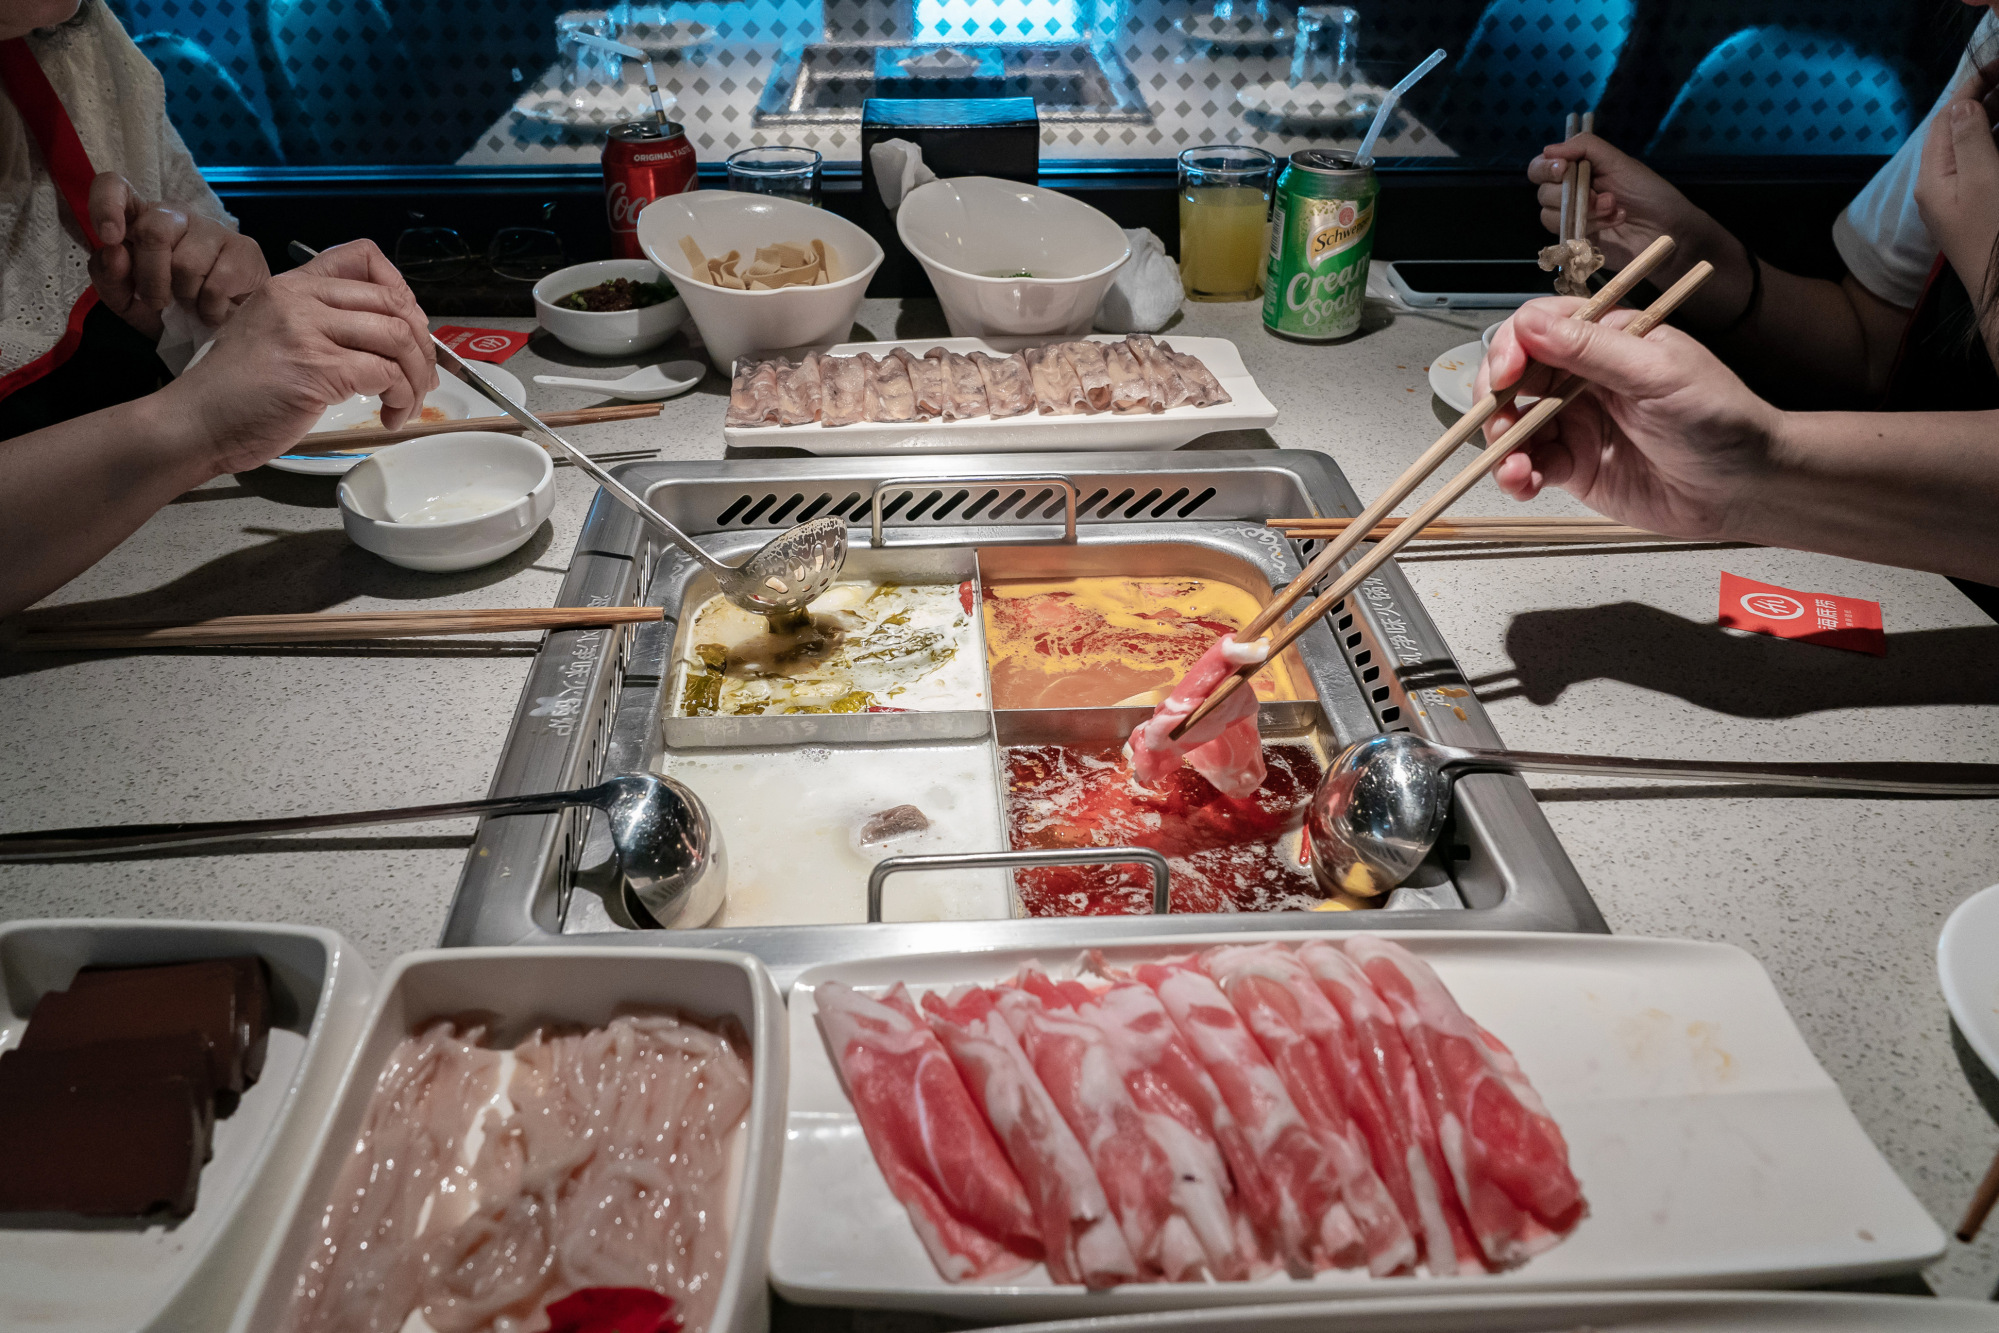 Plates of food sit on a table as diners cook them in a pot at a Haidilao hotpot restaurant in Hong Kong.